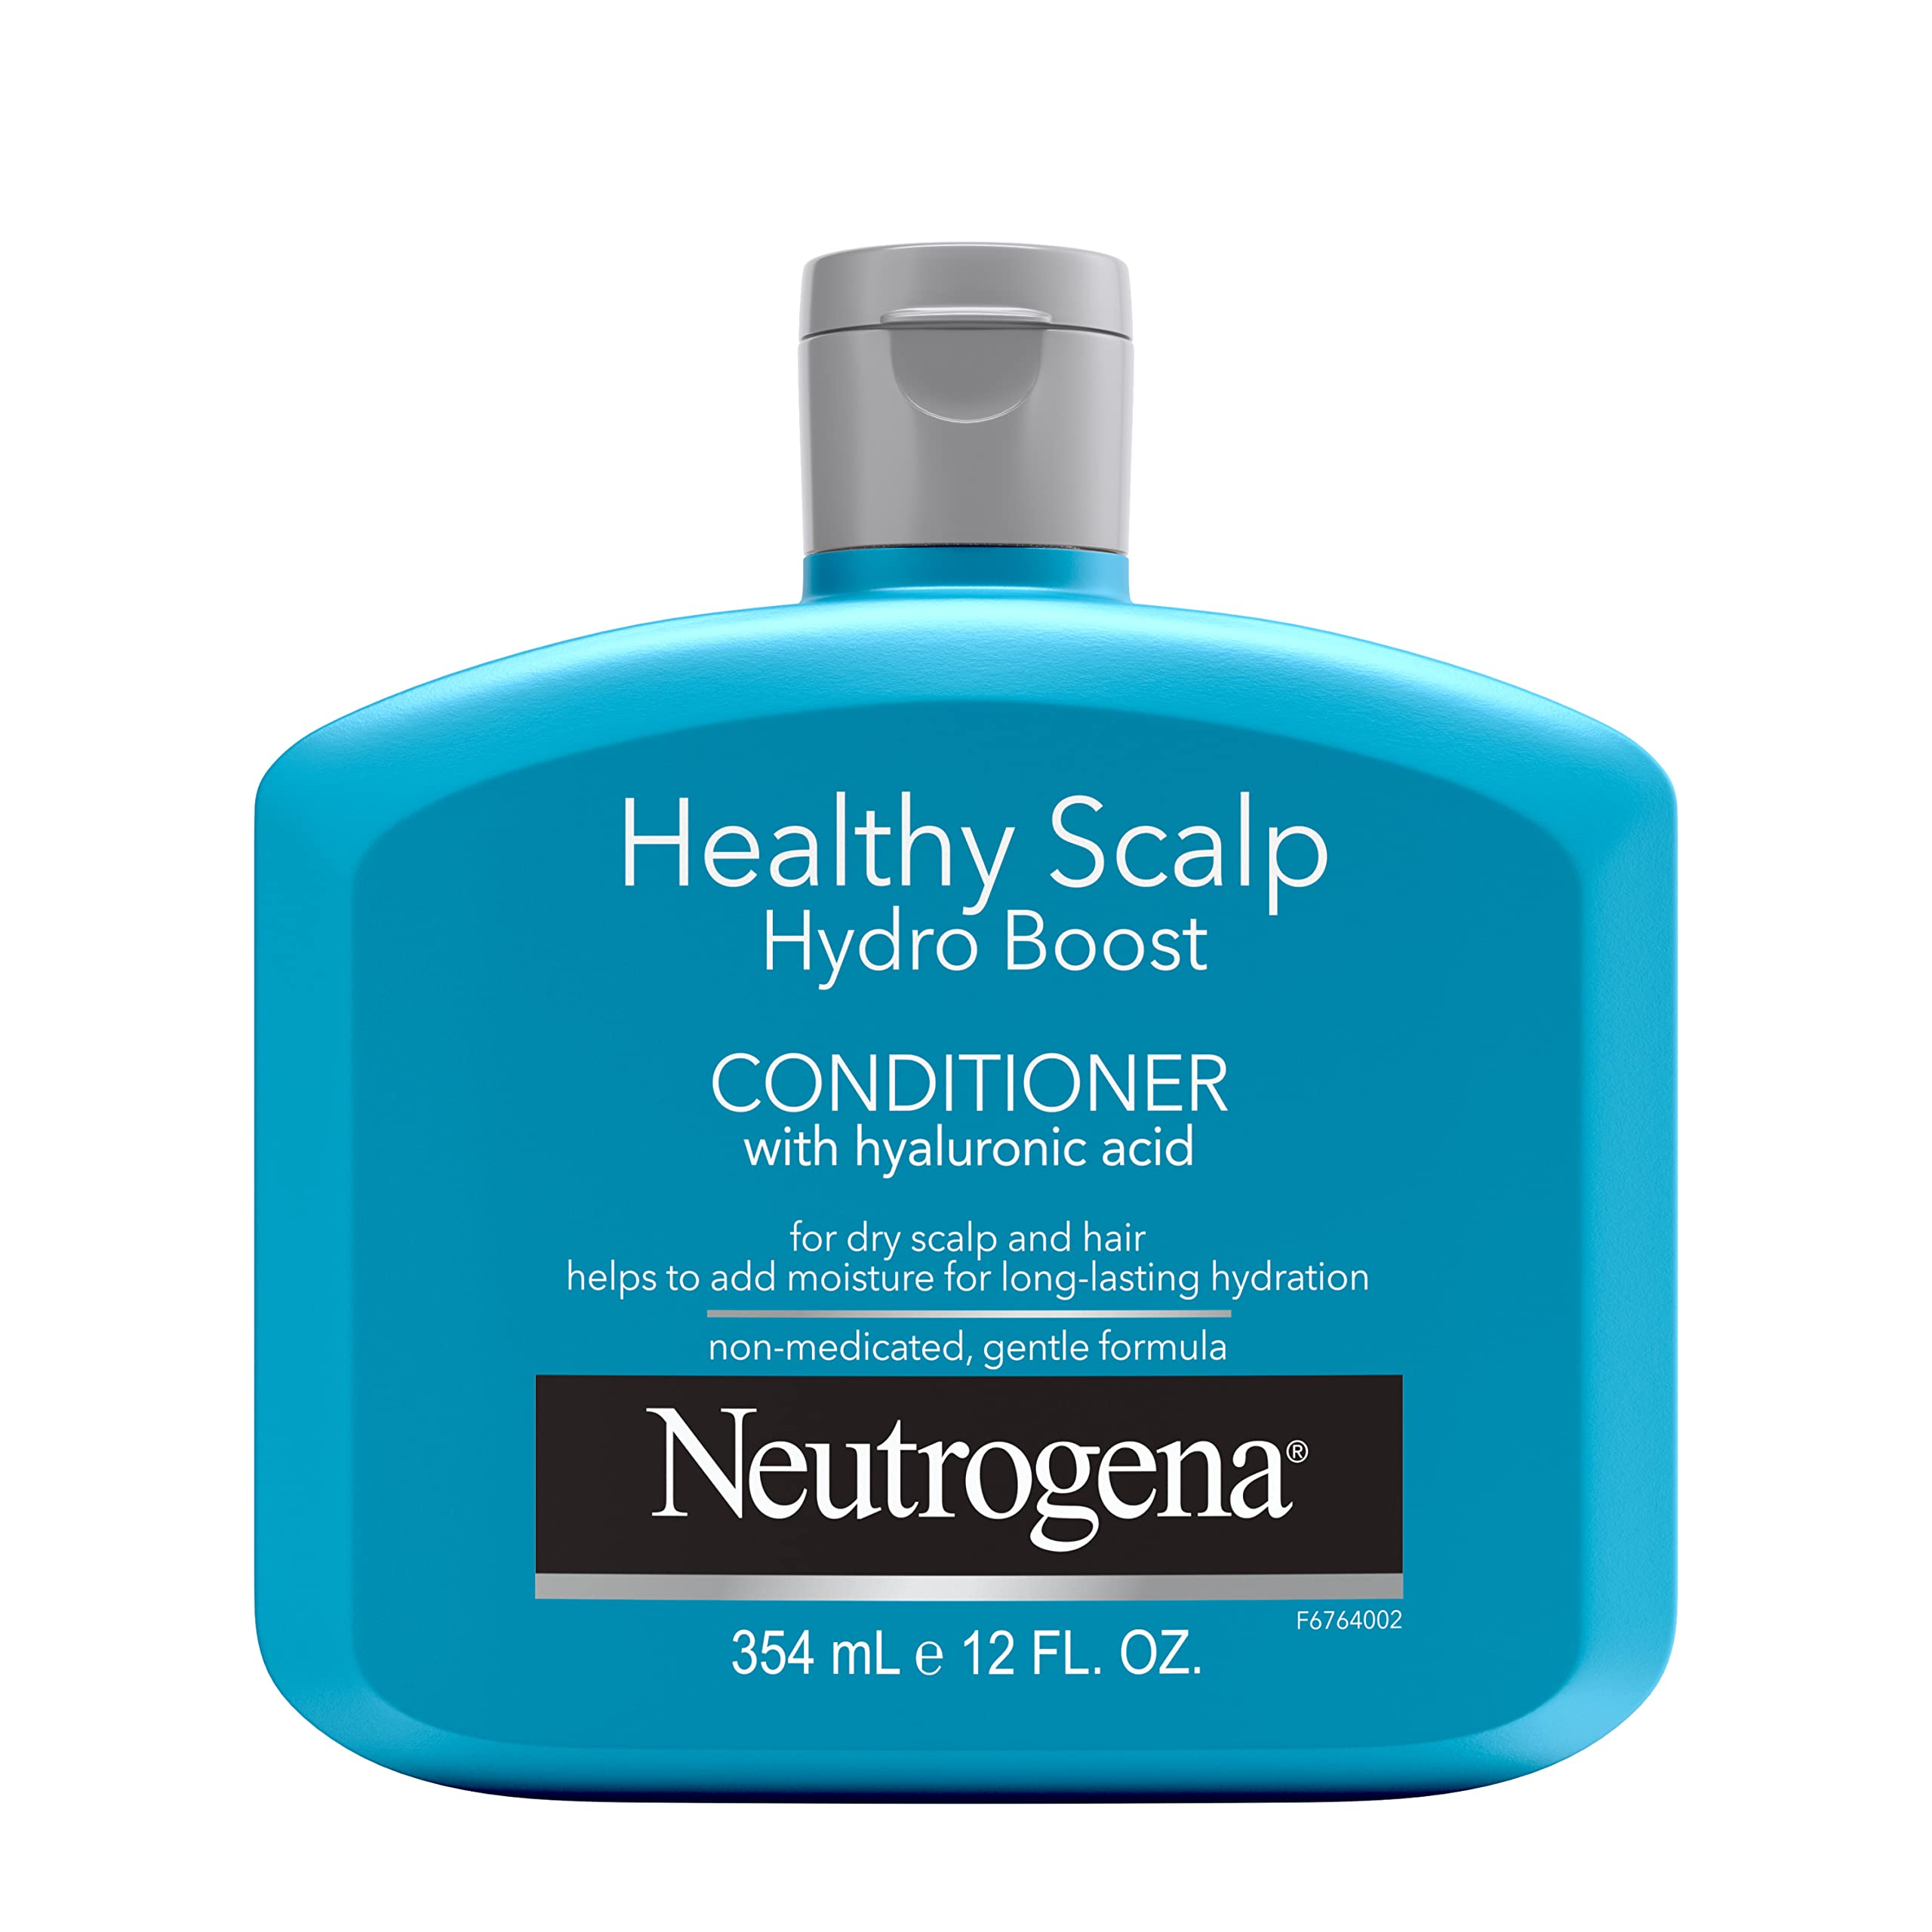 Neutrogena Moisturizing Healthy Scalp Hydro Boost Conditioner for Dry Hair and Scalp, with Hydrating Hyaluronic Acid, pH-Balanced, Paraben & Phthalate-Free, Color-Safe, 12 fl oz